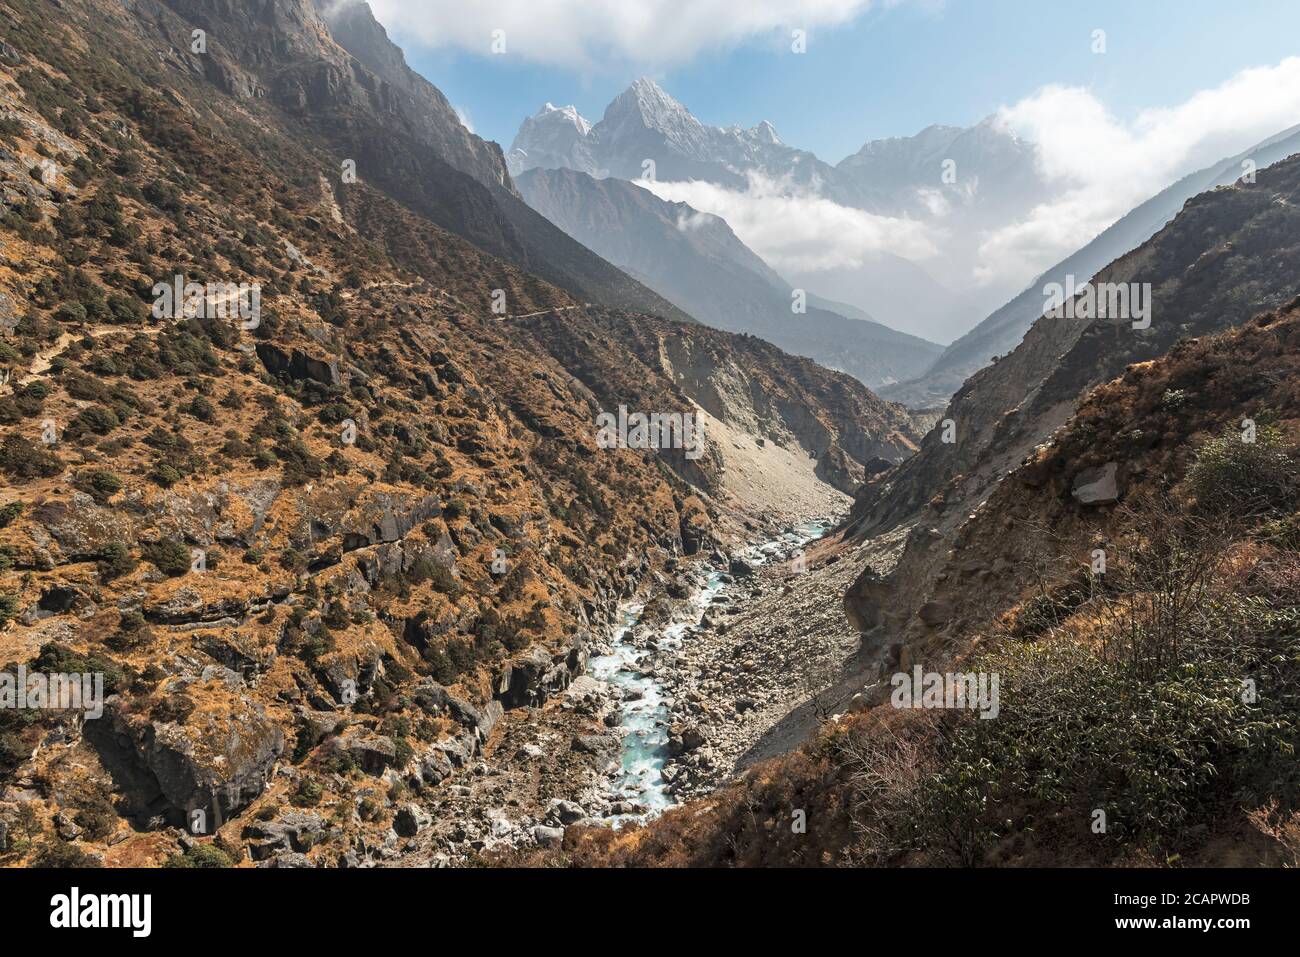 Thamserku and the surrounding peaks overlooking the Bhote Koshi river as it flows down from Thame. Stock Photo